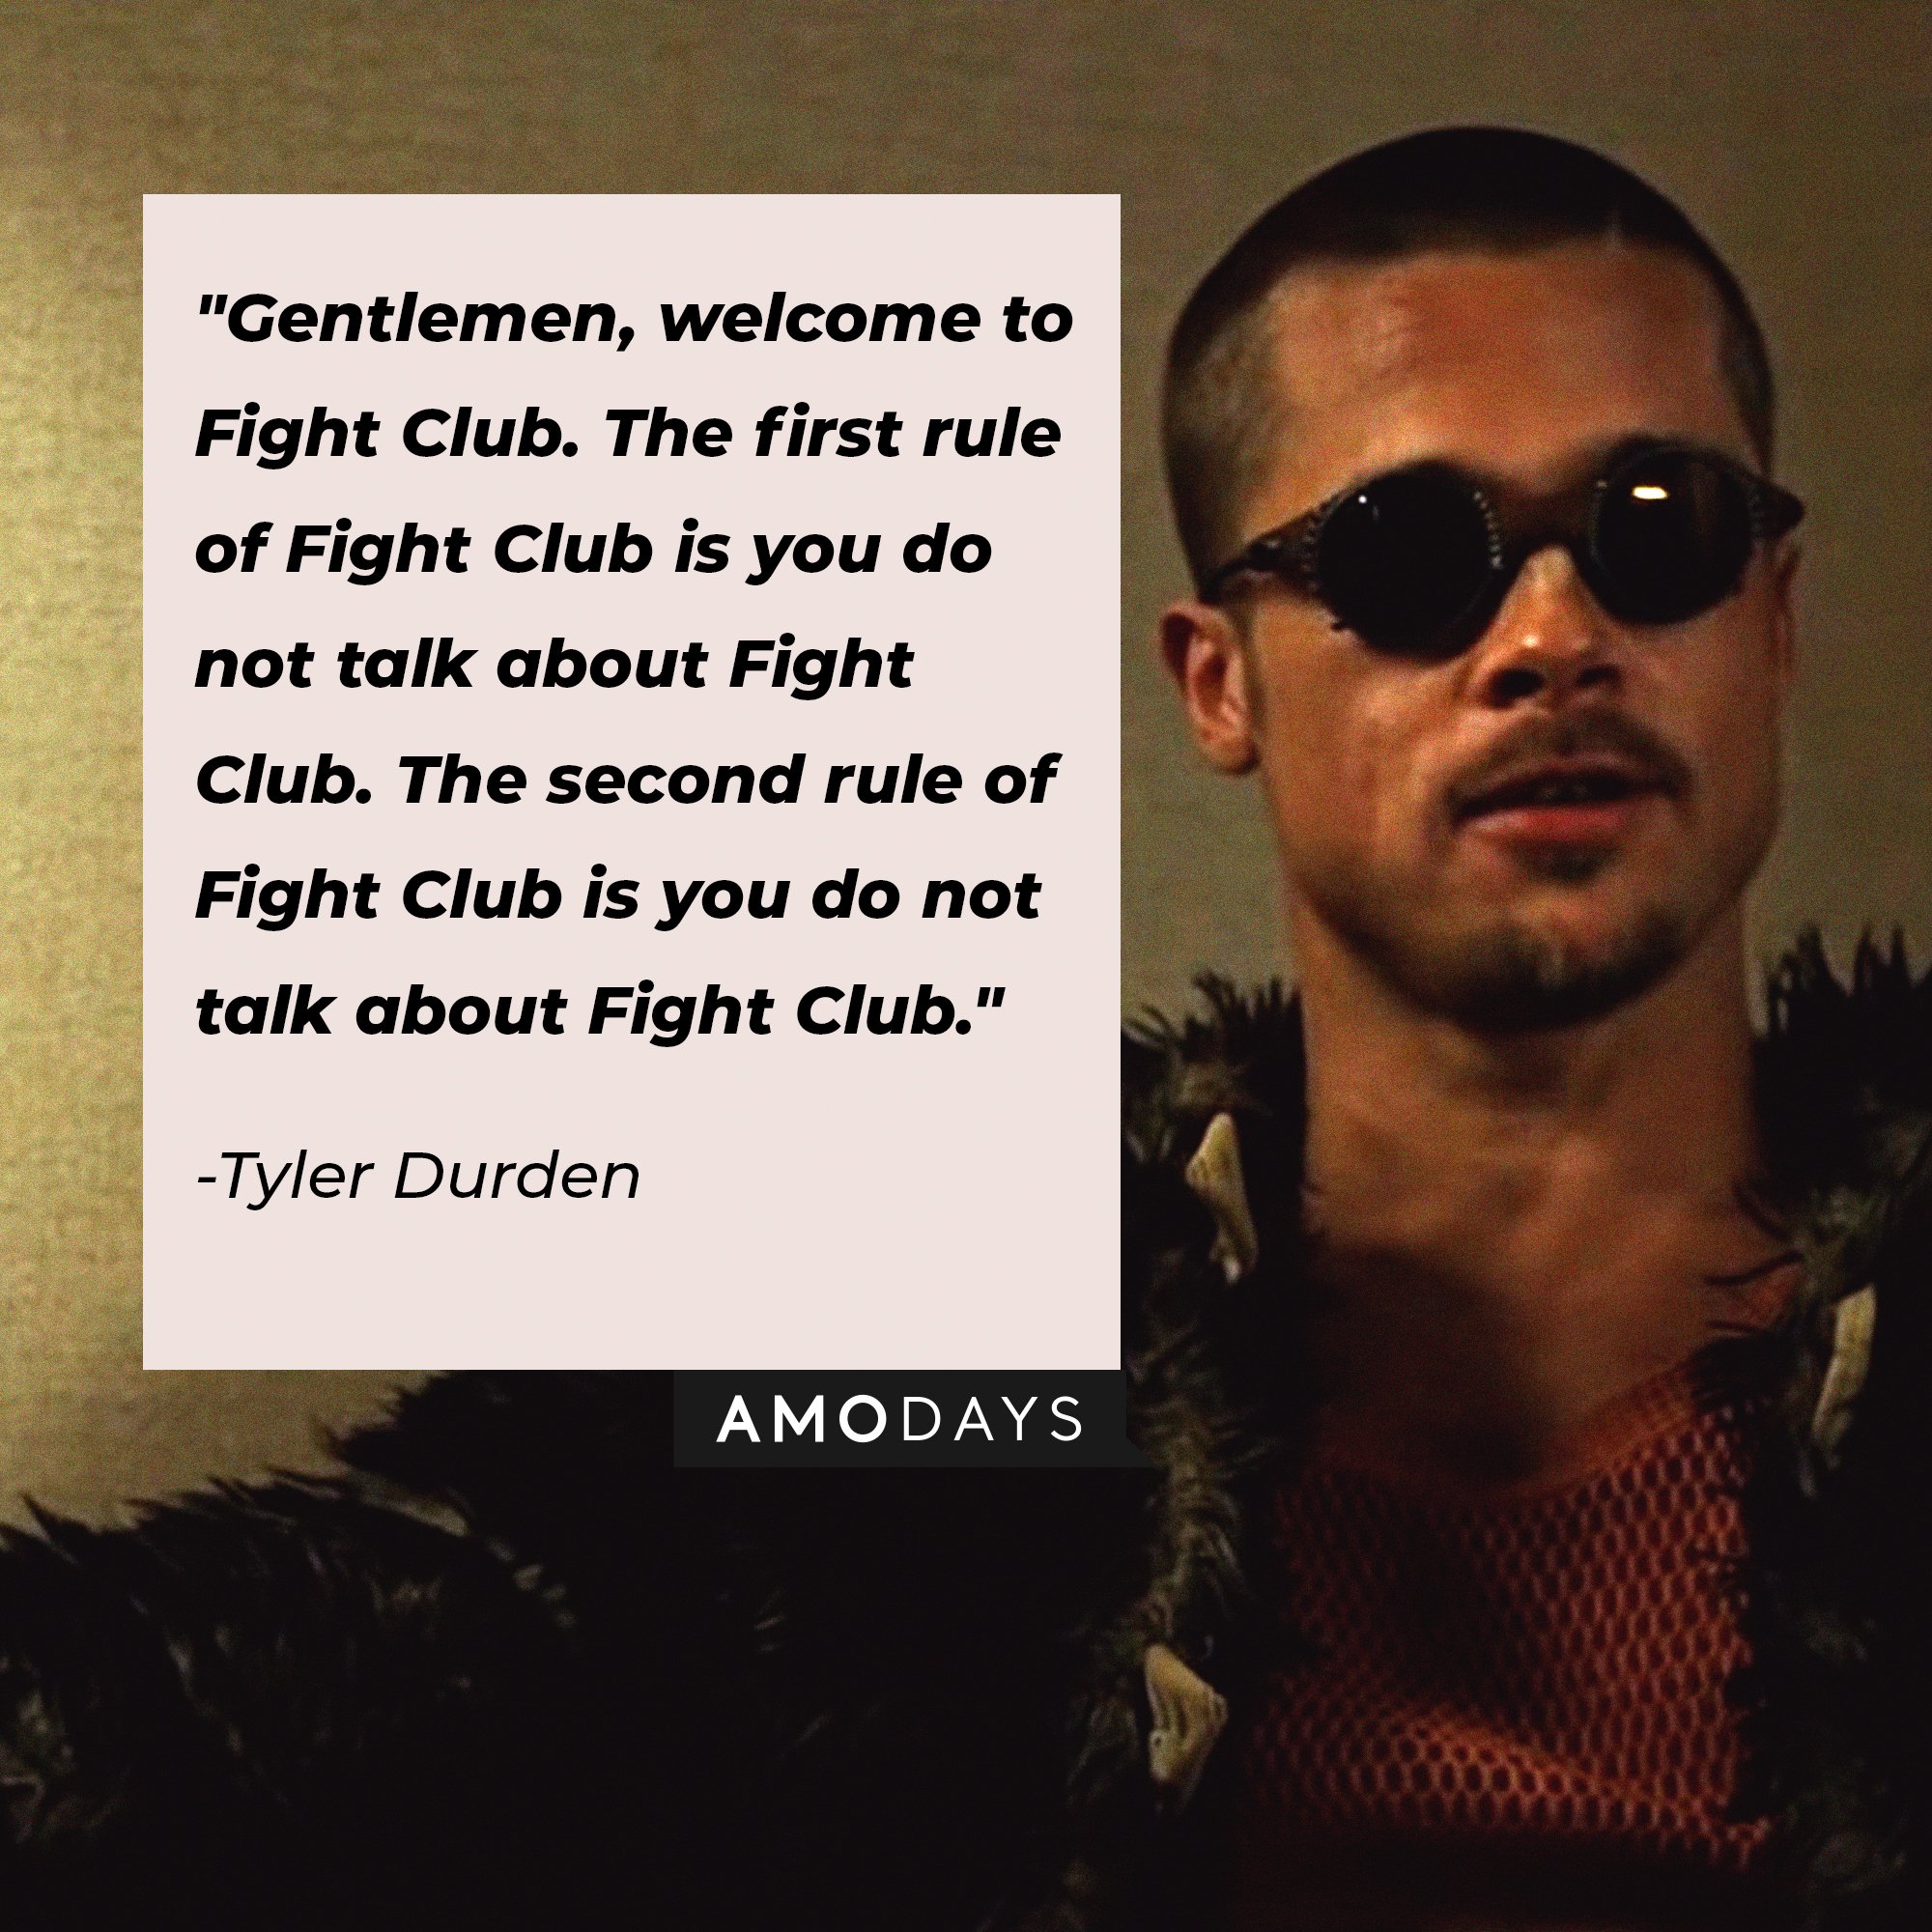  Tyler Durden’s quote: "Gentlemen, welcome to Fight Club. The first rule of Fight Club is you do not talk about Fight Club. The second rule of Fight Club is you do not talk about Fight Club." | Image: AmoDays